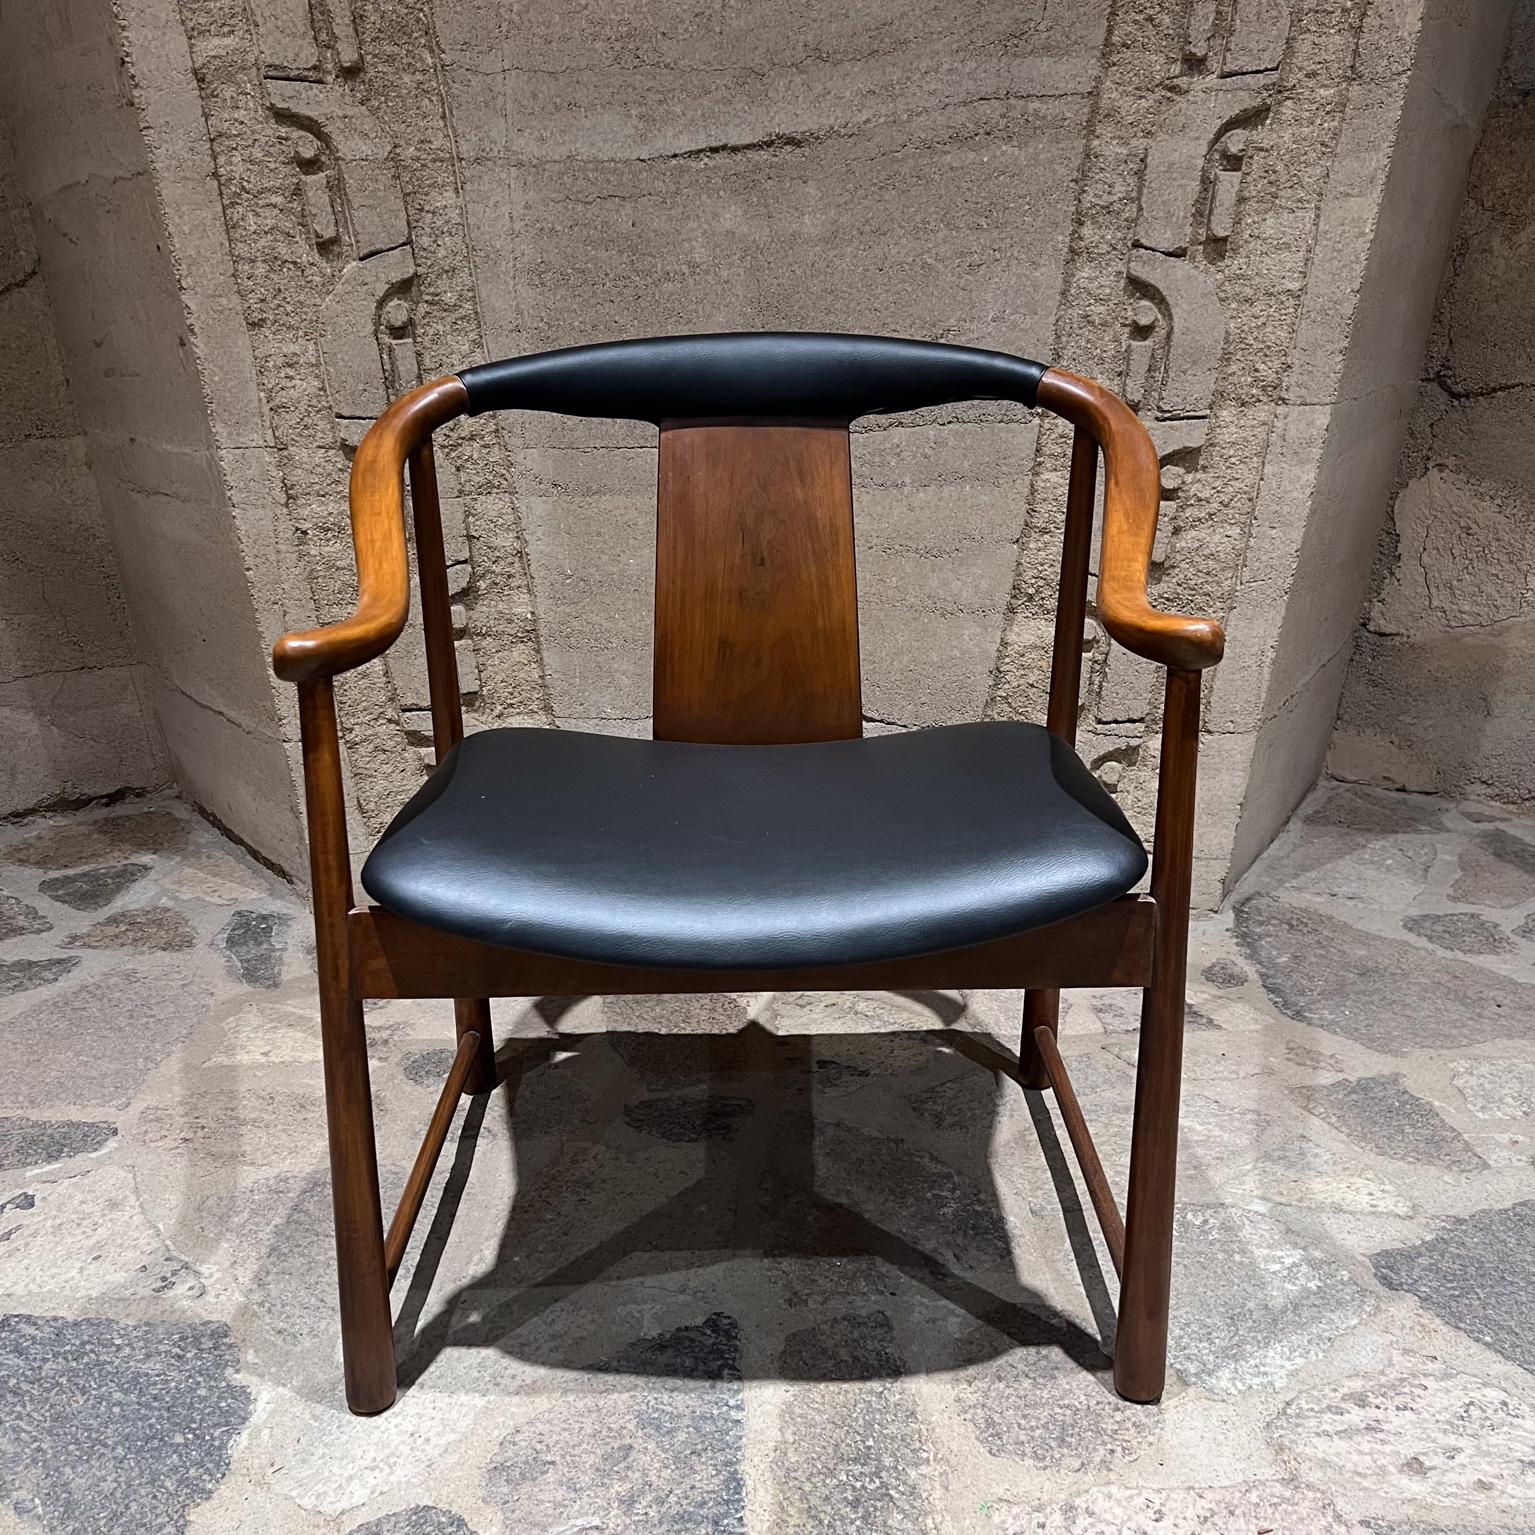 1960s by Baker Furniture Co attributed to Far East Collection Ming Armchair Michael Taylor
after Arne Hovmand Olsen, Hans Wegner and Finn Juhl
30.25 h x 22.75 d x 27 w
Seat 16.5 h Arm rest 23.5 h
Baker label present
Preowned original vintage